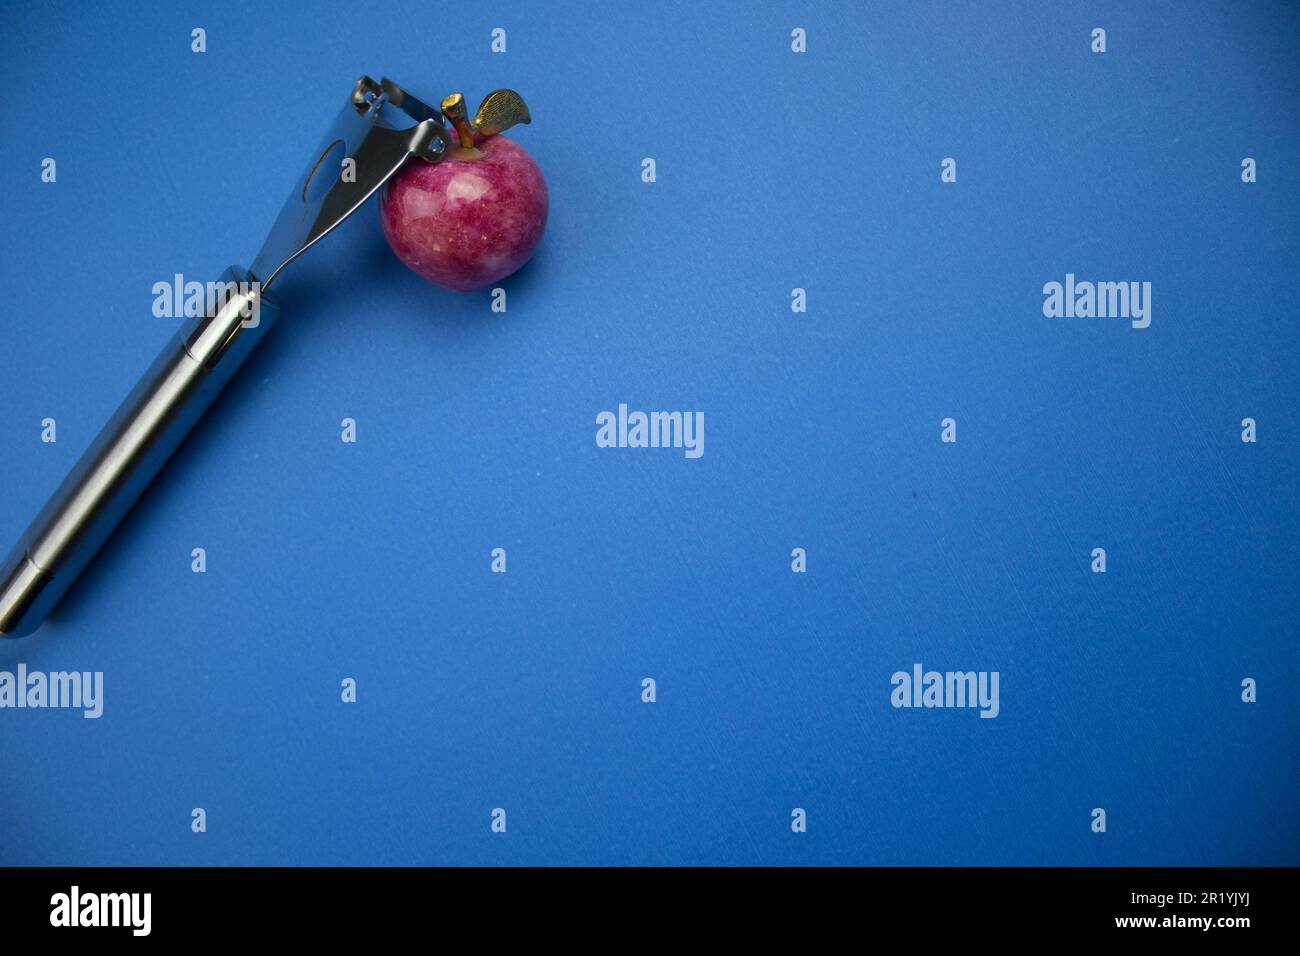 https://c8.alamy.com/comp/2R1YJYJ/placed-on-the-edge-of-the-blue-background-a-fruit-peeler-and-a-red-colored-stone-apple-2R1YJYJ.jpg